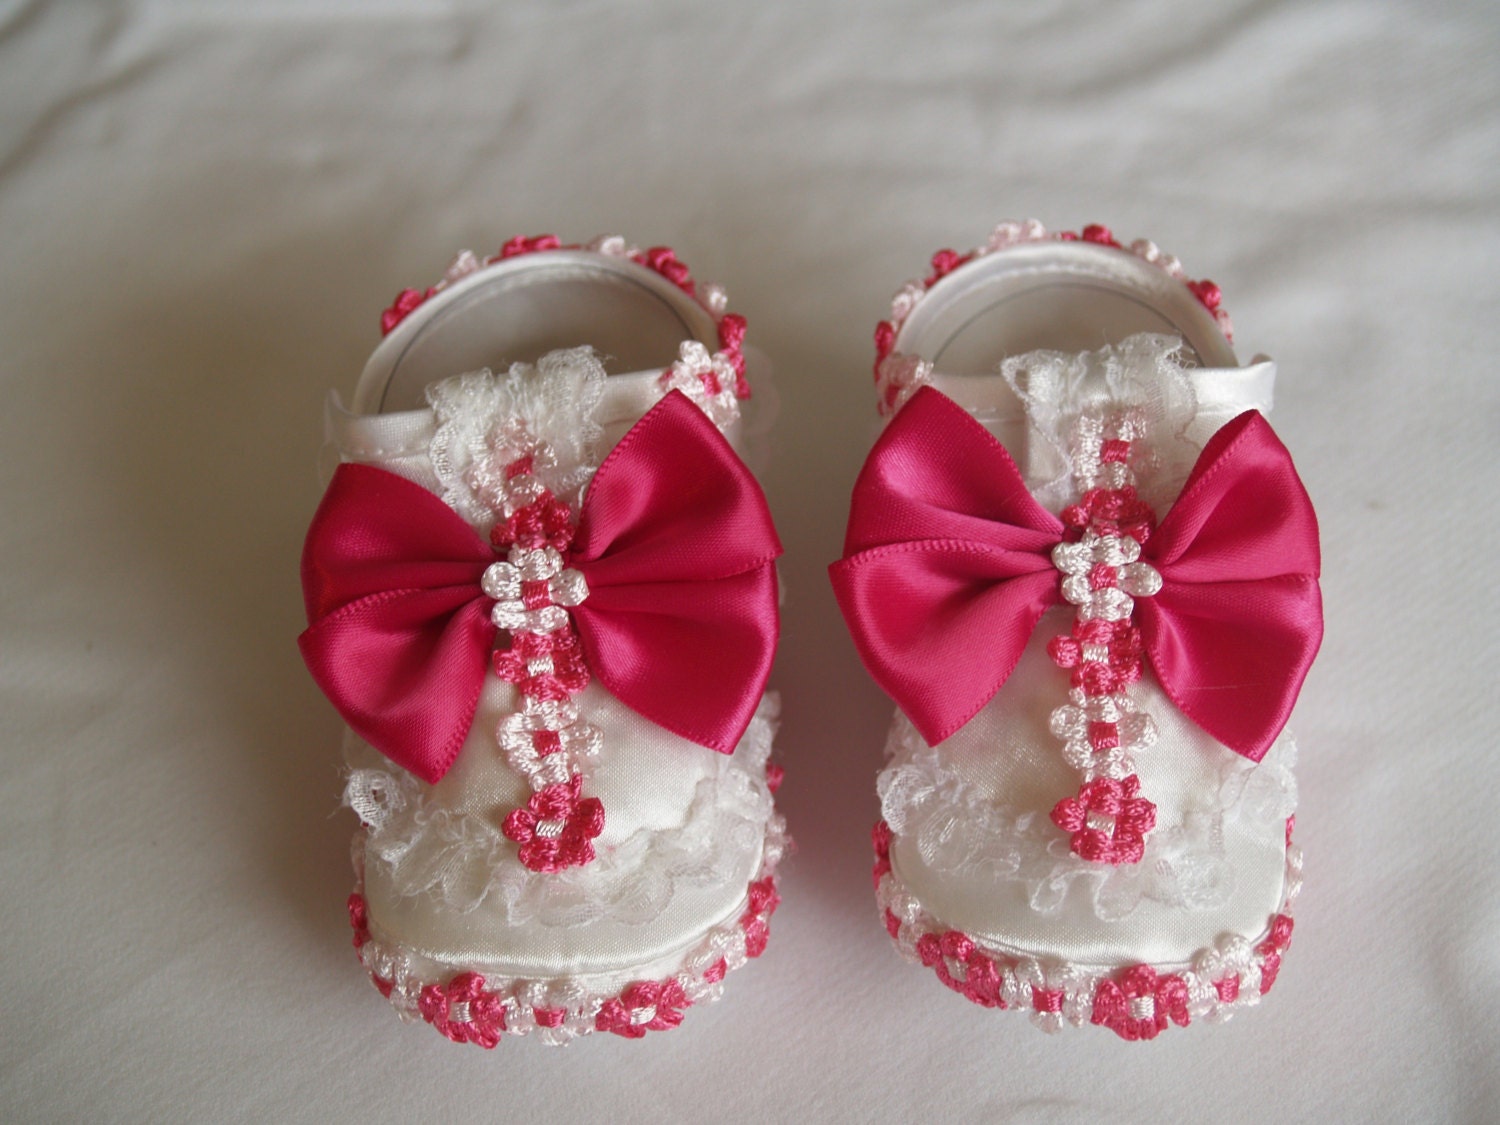 us size 2 baby shoes